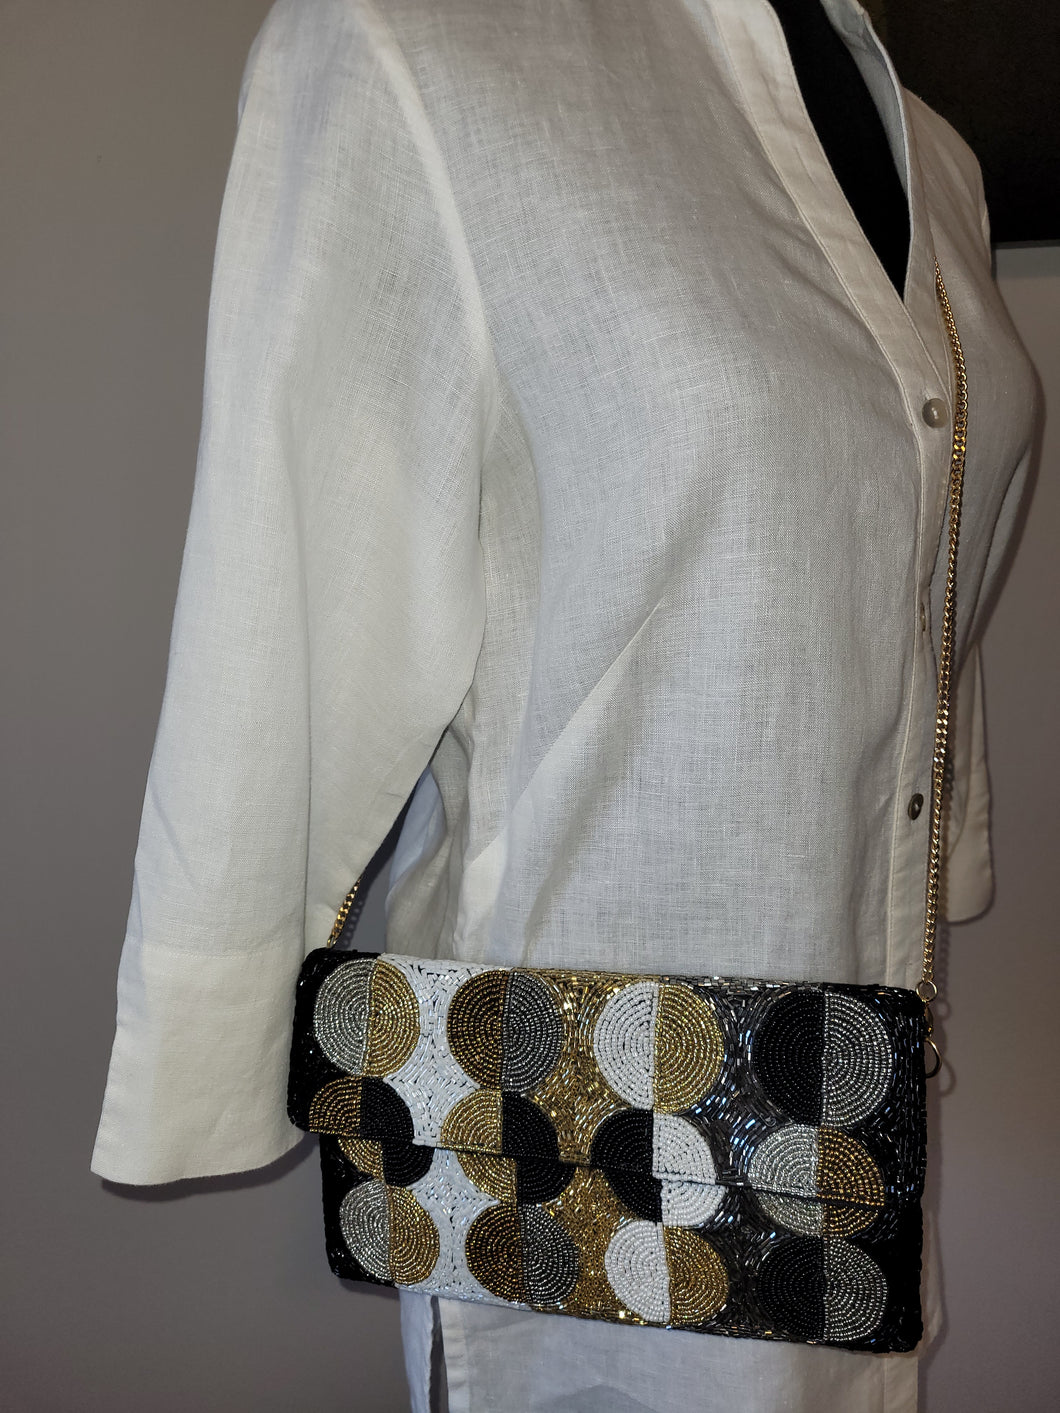 Black, Gold and White Circle Clutch